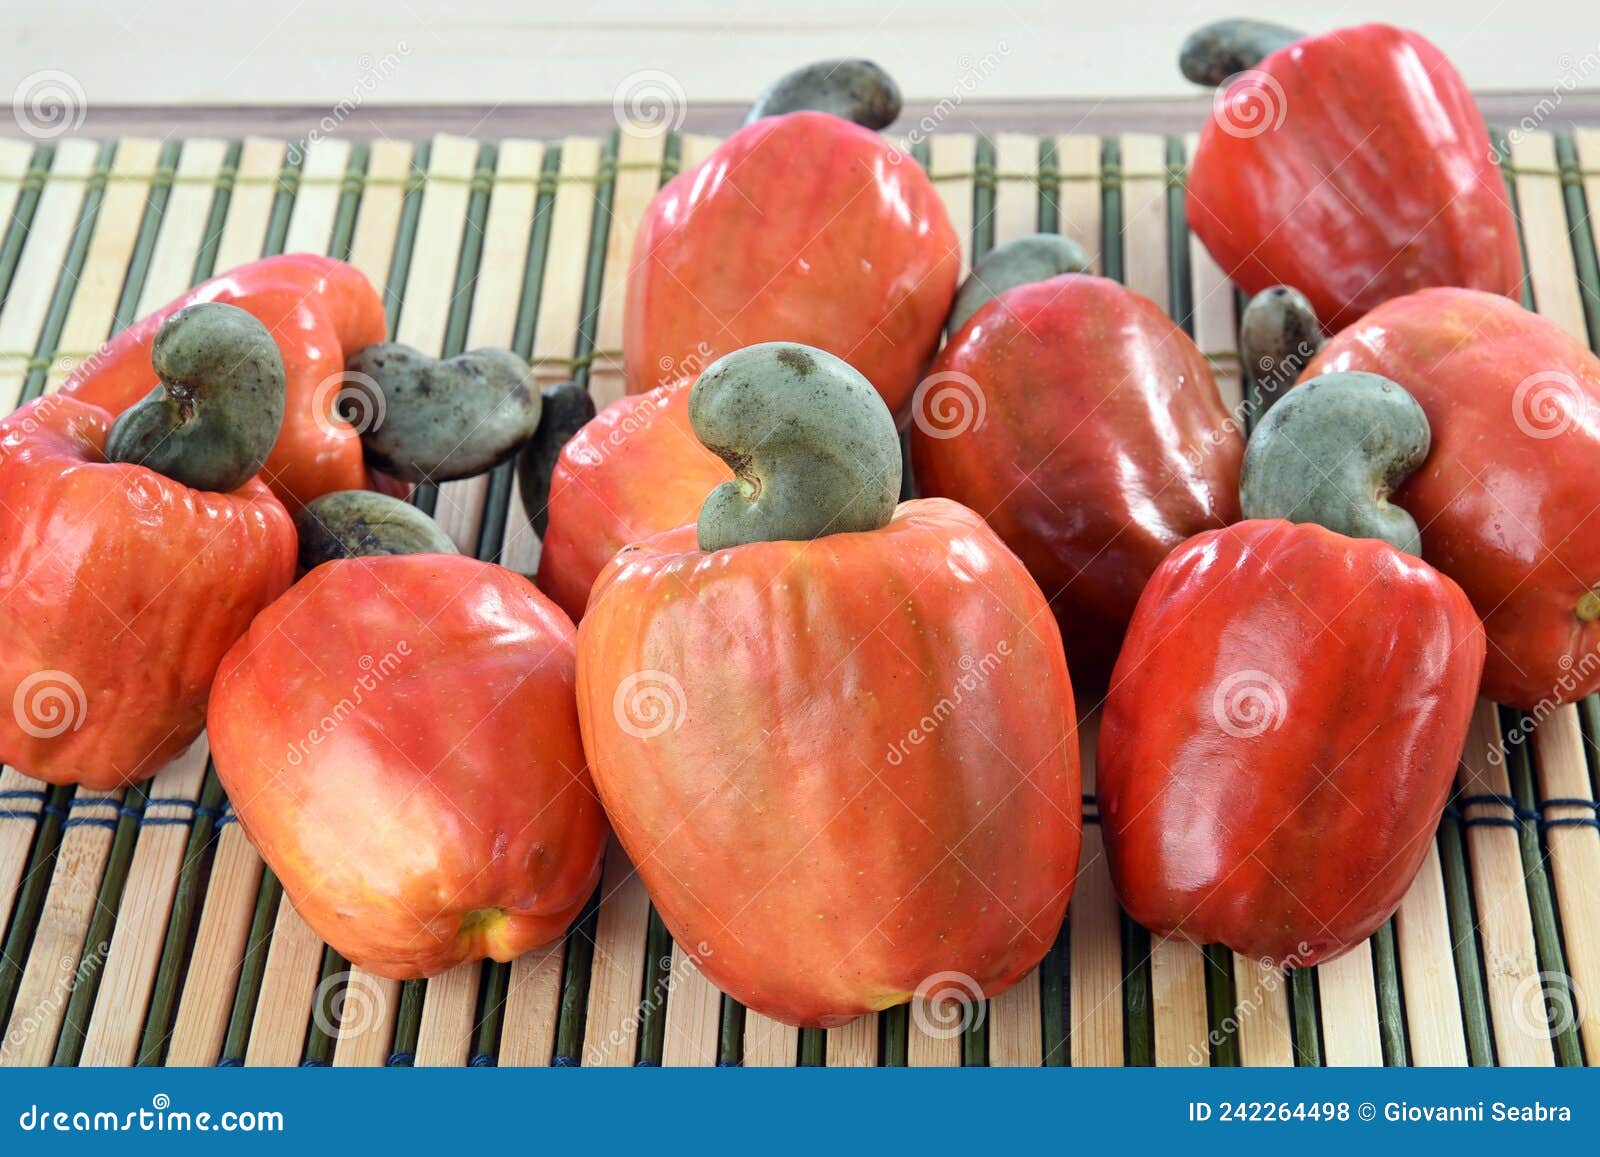 cashew natural tasty tropical fruit ideal for juice